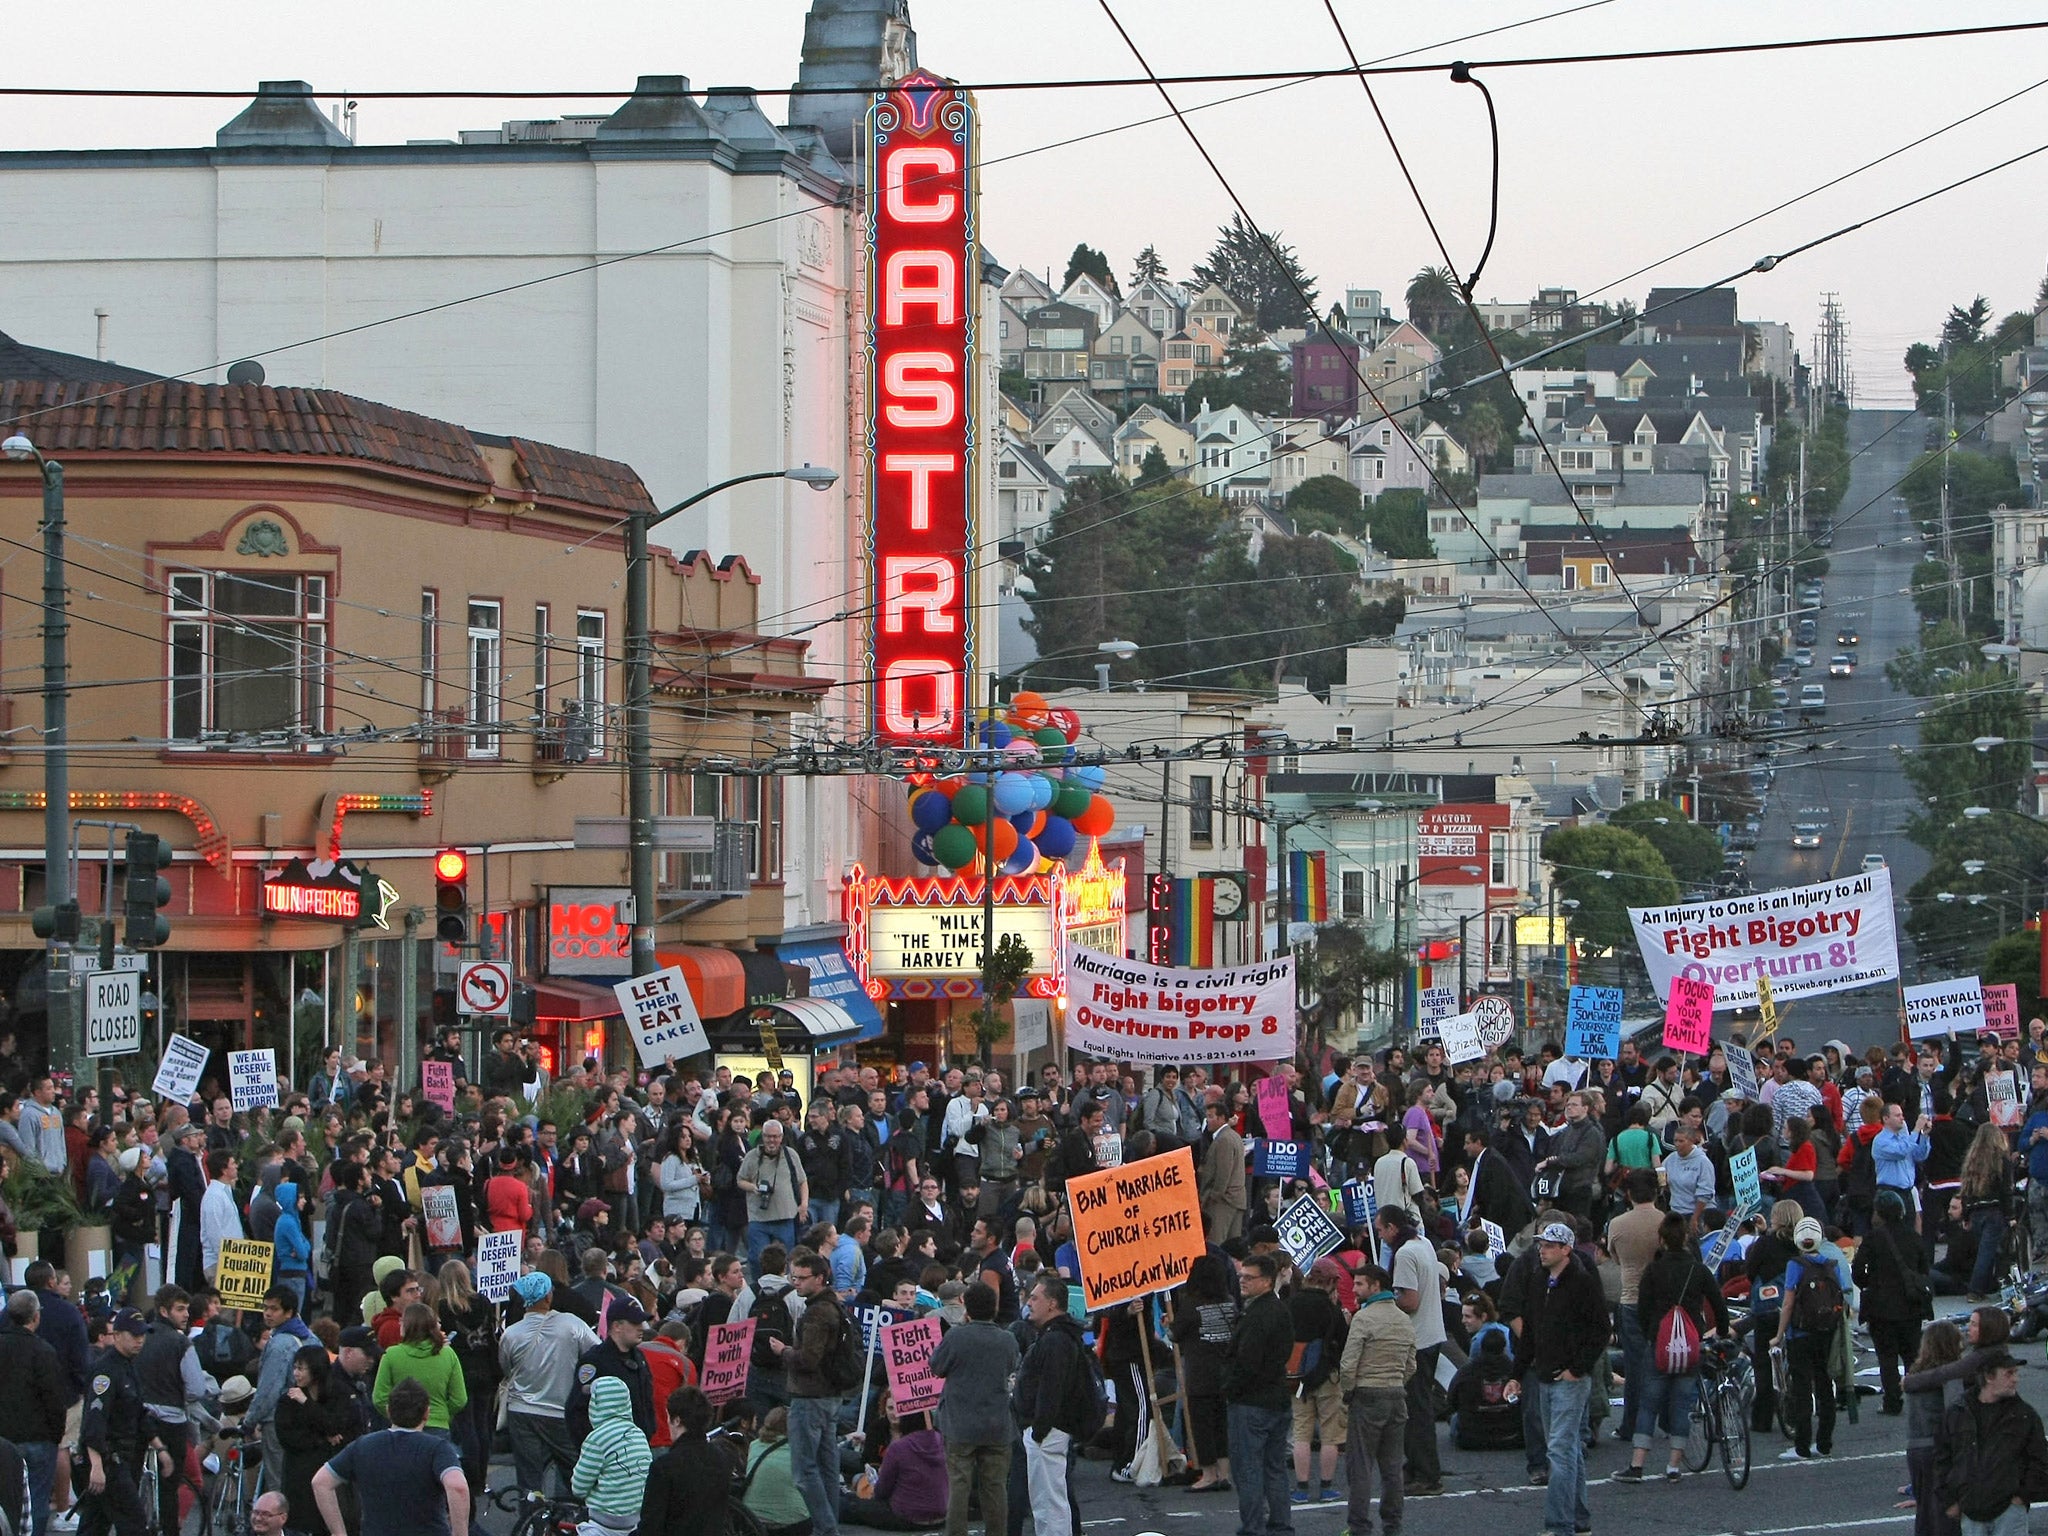 Supporters of same-sex marriage on Castro Street in 2009